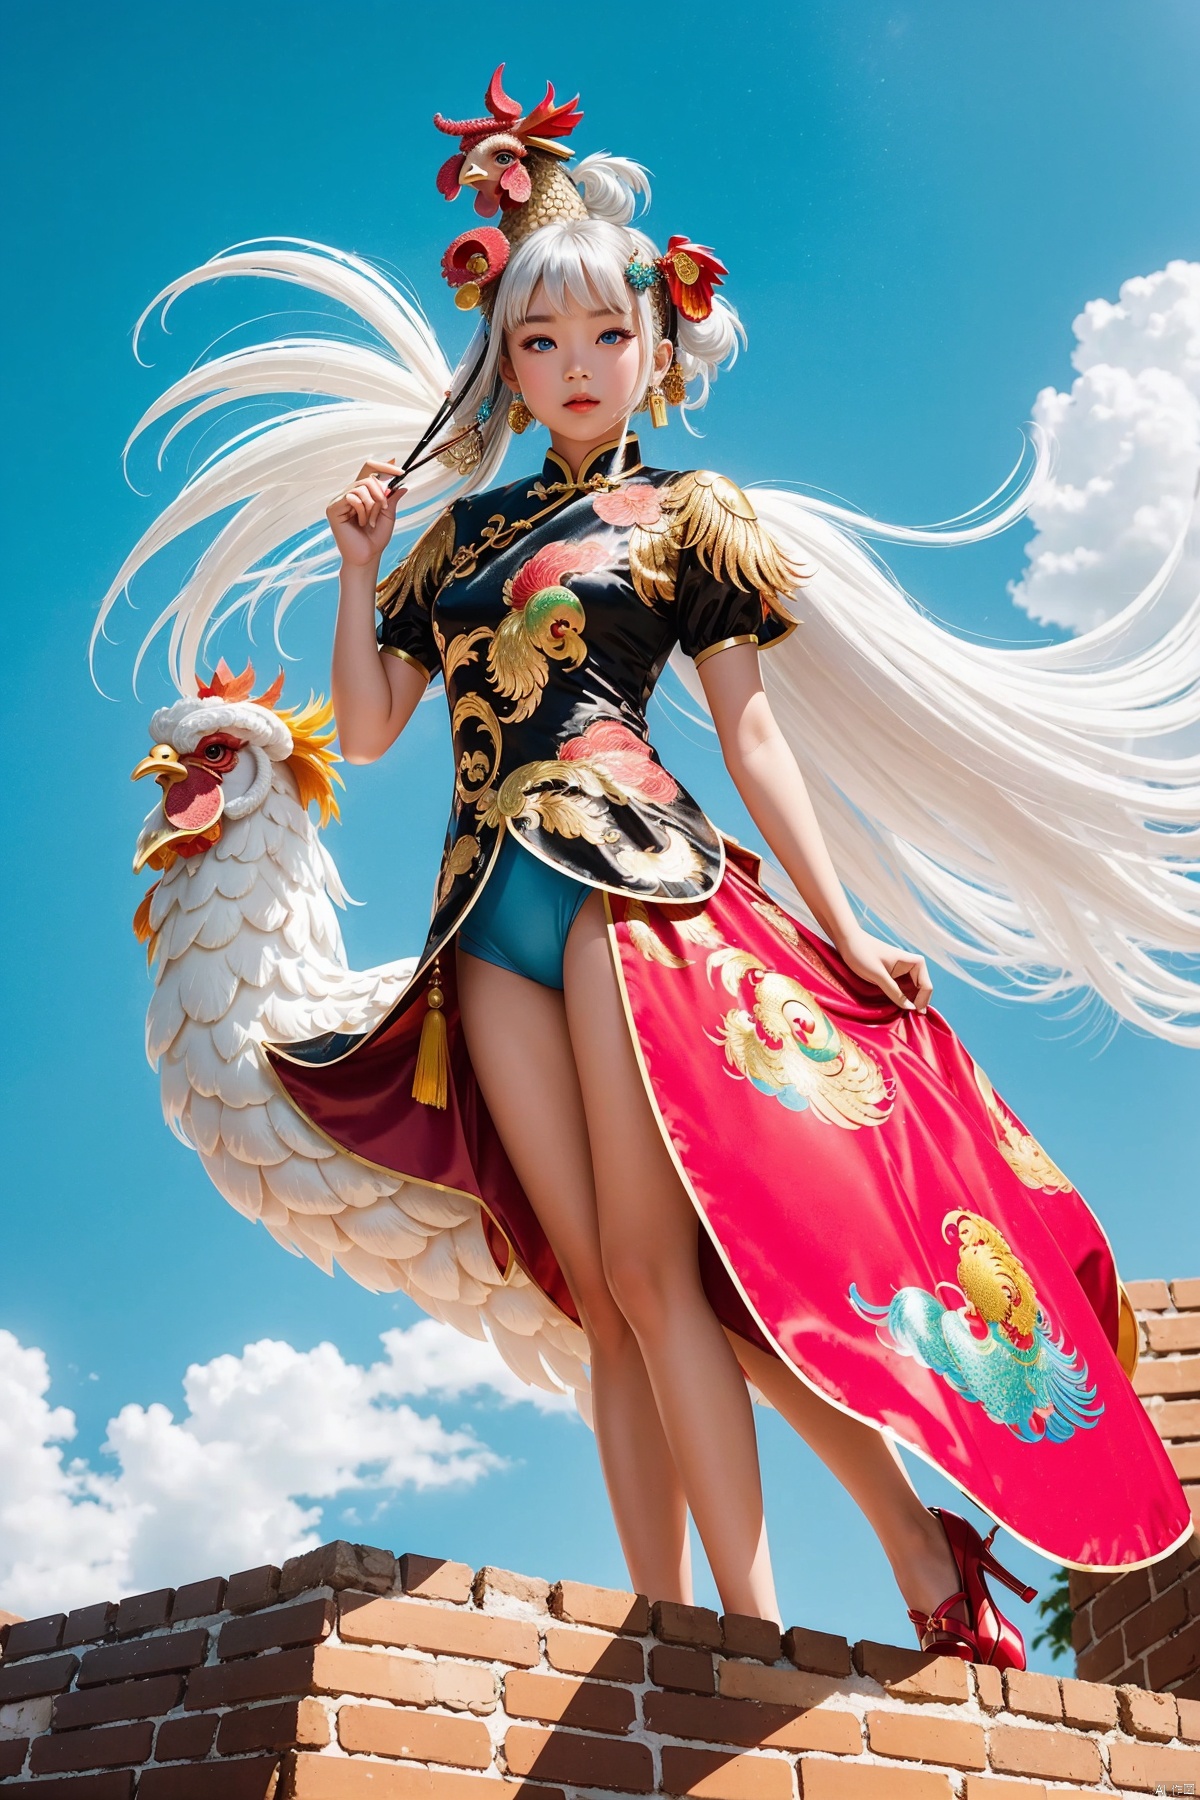 (Little girl:1.5)riding a gigantic (Chinese soil wall:1.5), which is covered in shimmering golden scales, soaring through the air. They are tightly embracing a magnificent and colorful (Chinese rooster:1.5), whose feathers radiate a dazzling light in the sunlight.


A demon with (white hair:1.5),(blue eyes:1.5) resembling blue gemstones, and a fringed haircut. This demon exudes an outgoing and sunny personality. She is dressed in a peculiar, mechanical construct cheongsam gown, predominantly made of gossamer material, with accents that evoke the ambiance of fire element. The cheongsam gown itself is in vibrant Chinese red. Completing her ensemble, she wears a pair of high-heeled shoes.
, col